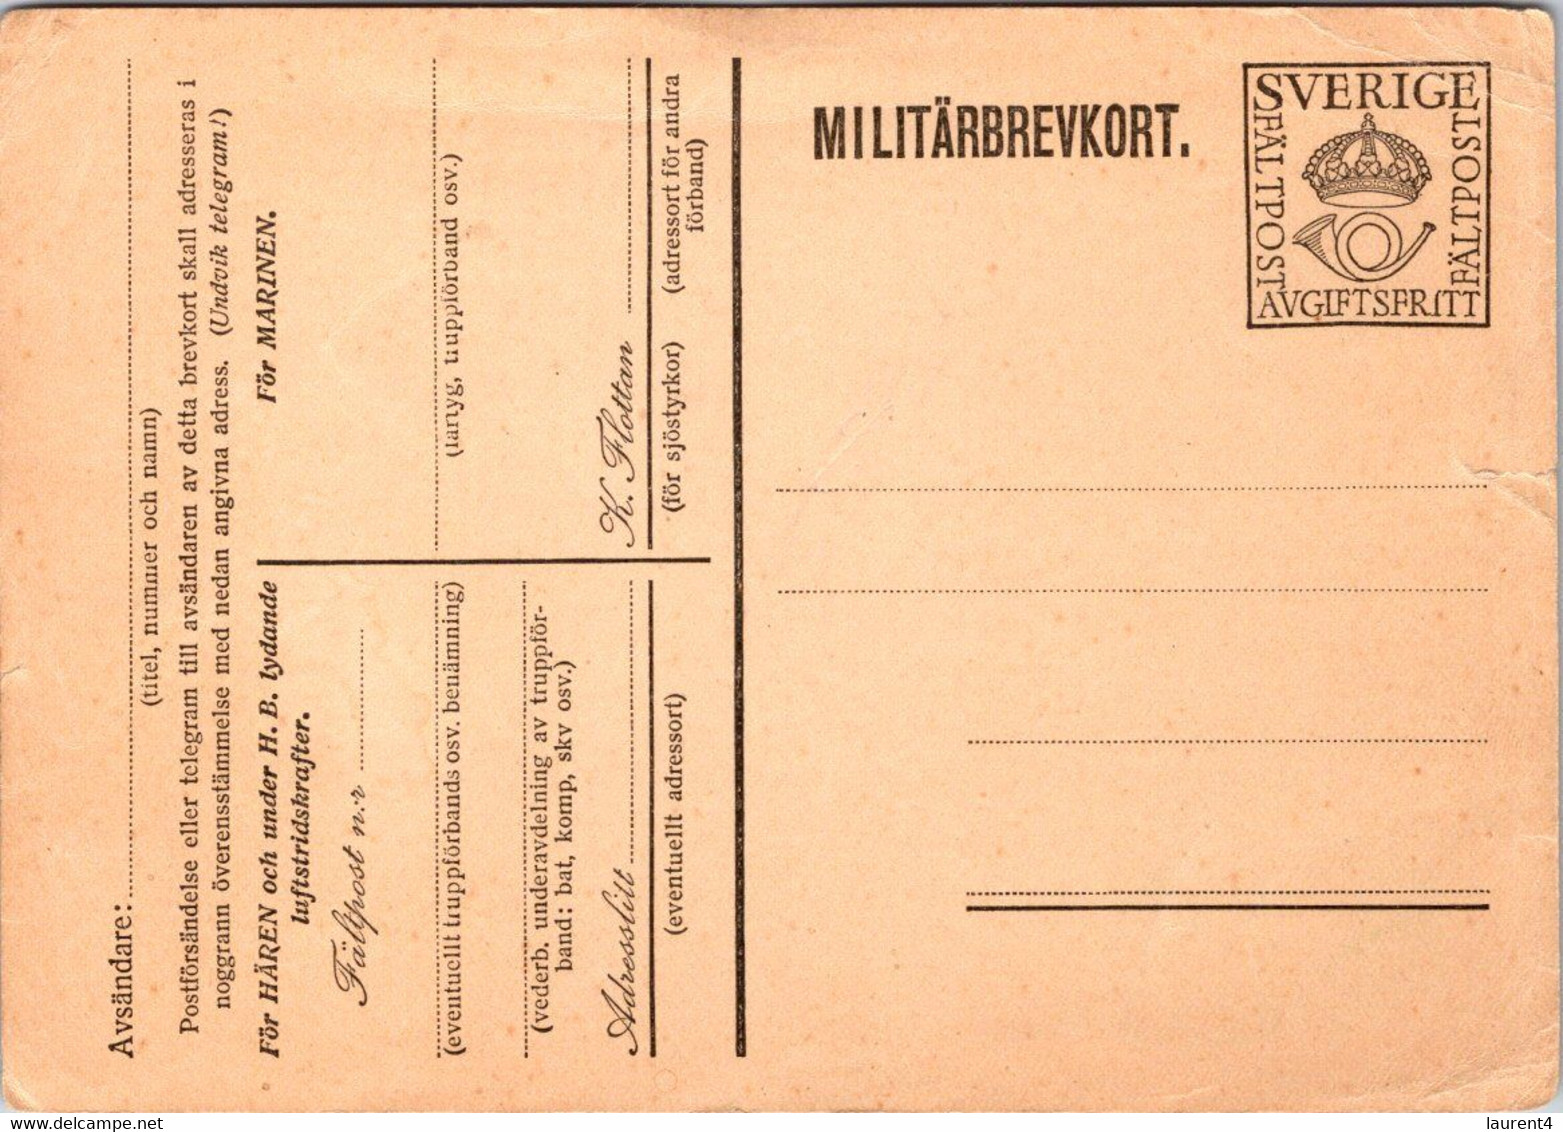 (3 C 10) Sweden - Not Posted - Military Pre-Paid Postcard (2 Items) - Militares